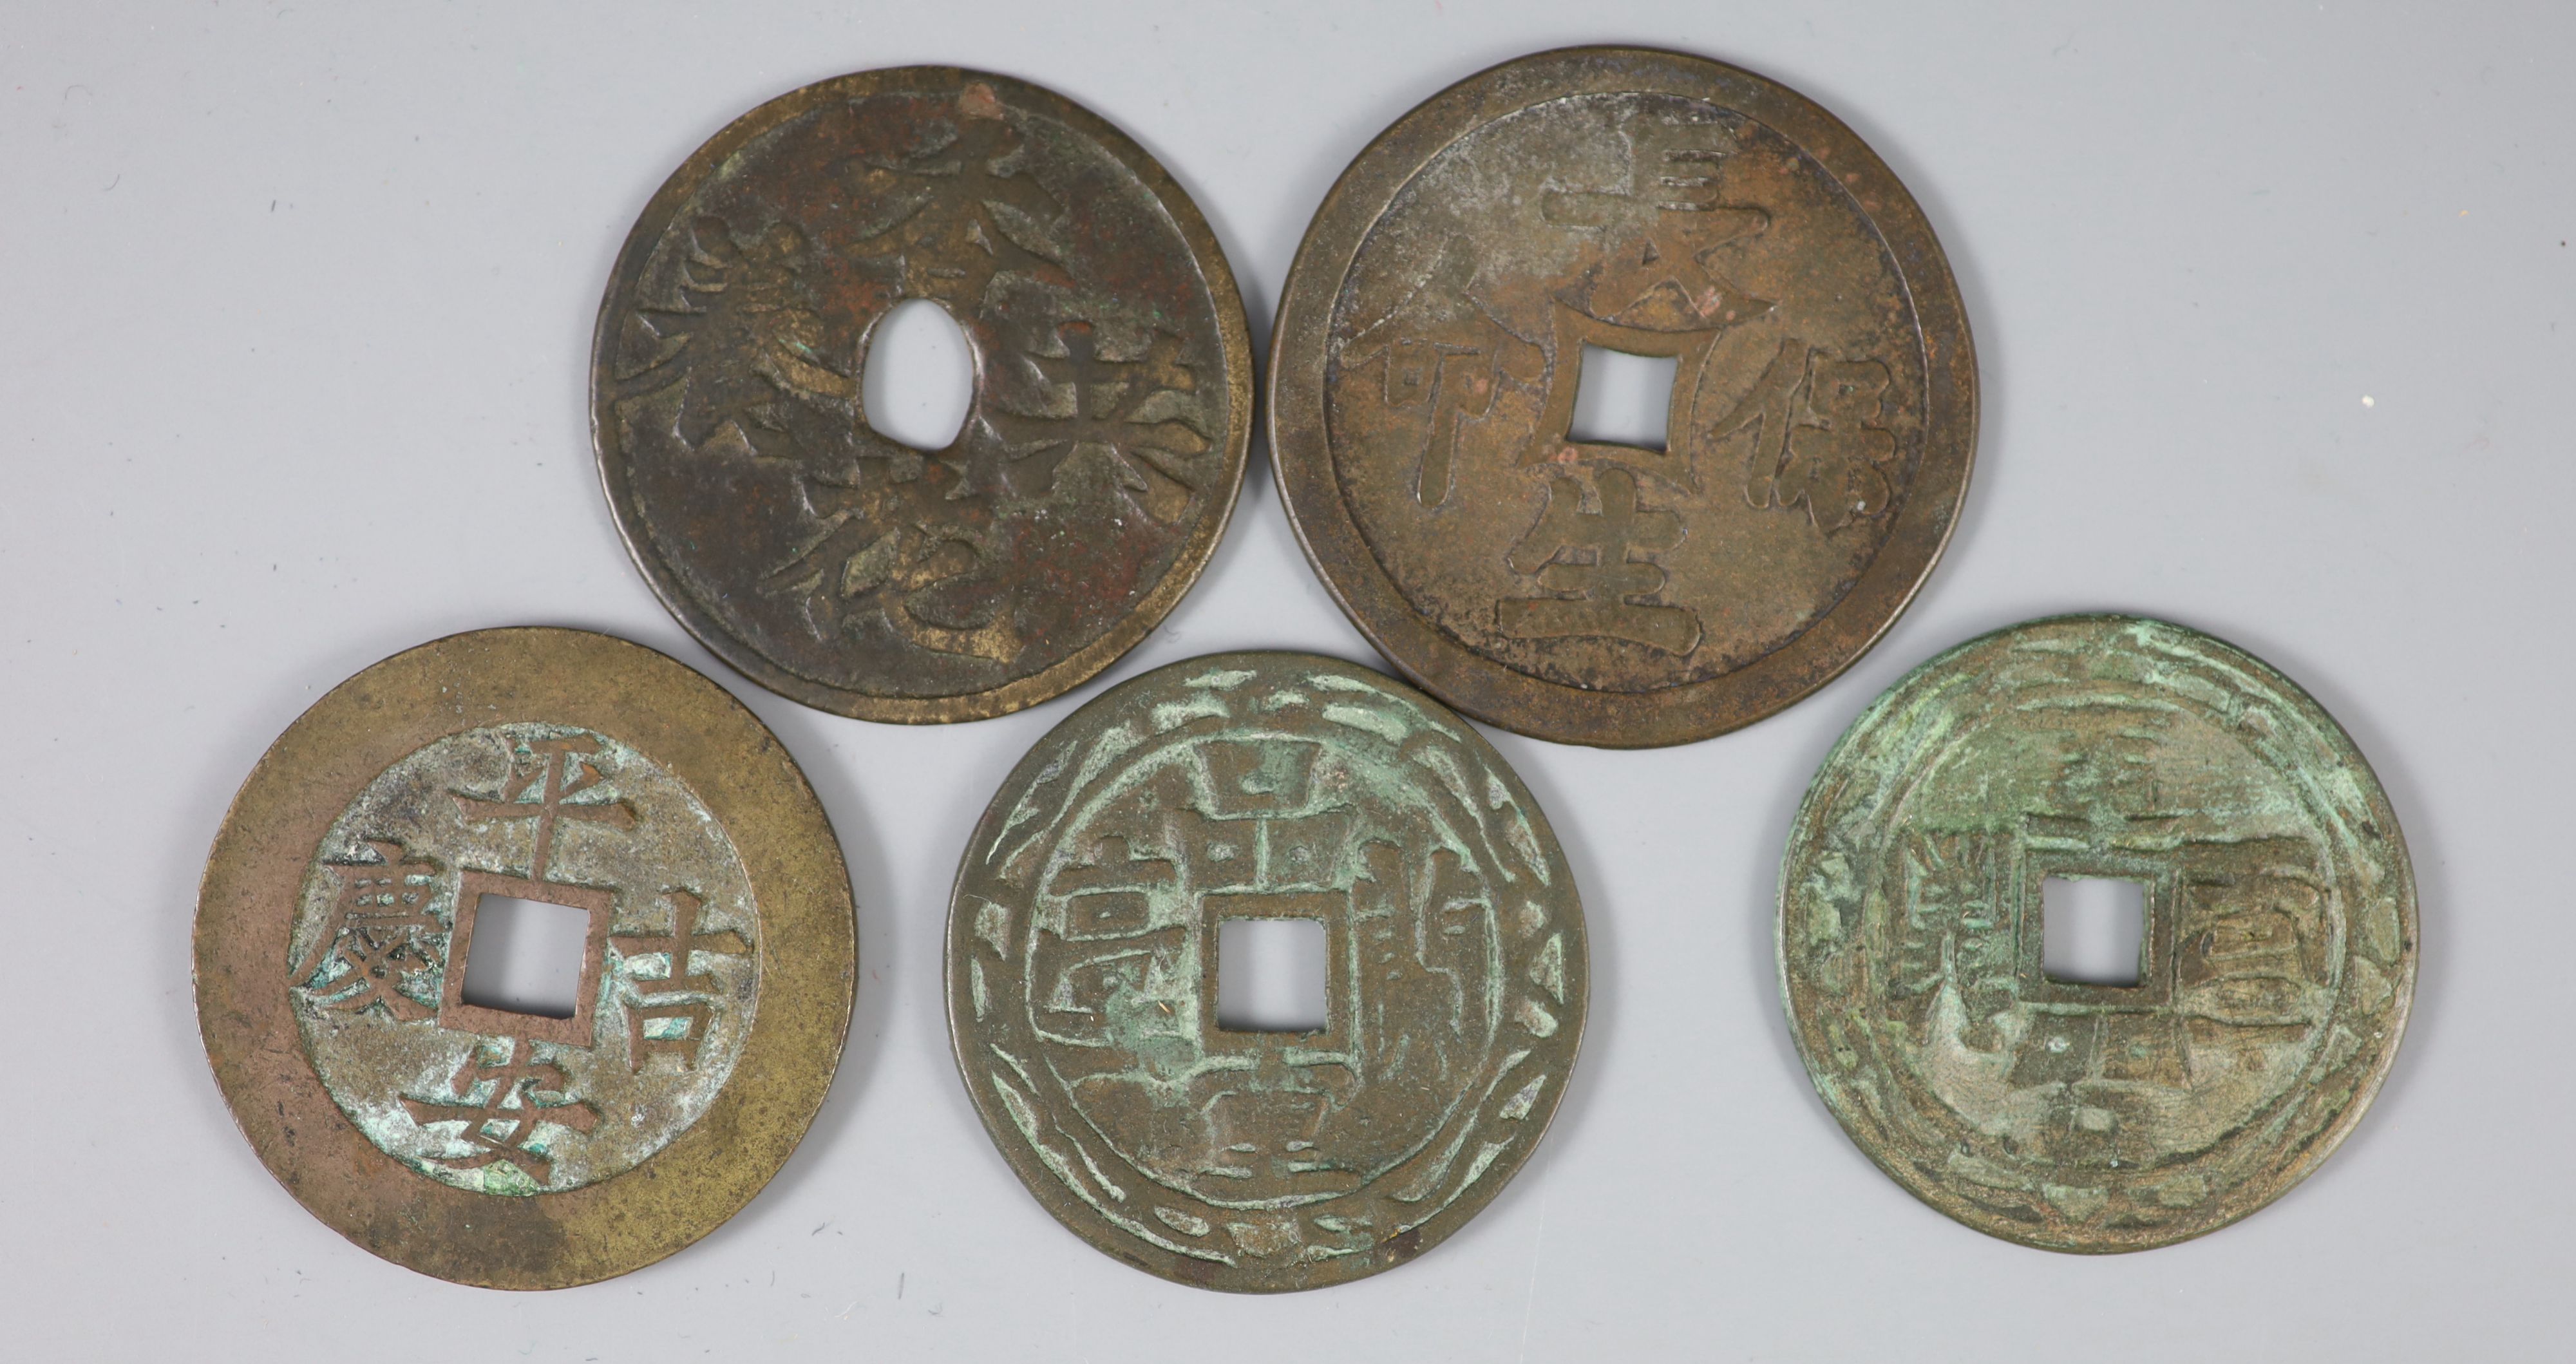 China, 5 bronze charms or amulets, Qing dynasty, all with four character obverse and pictorial